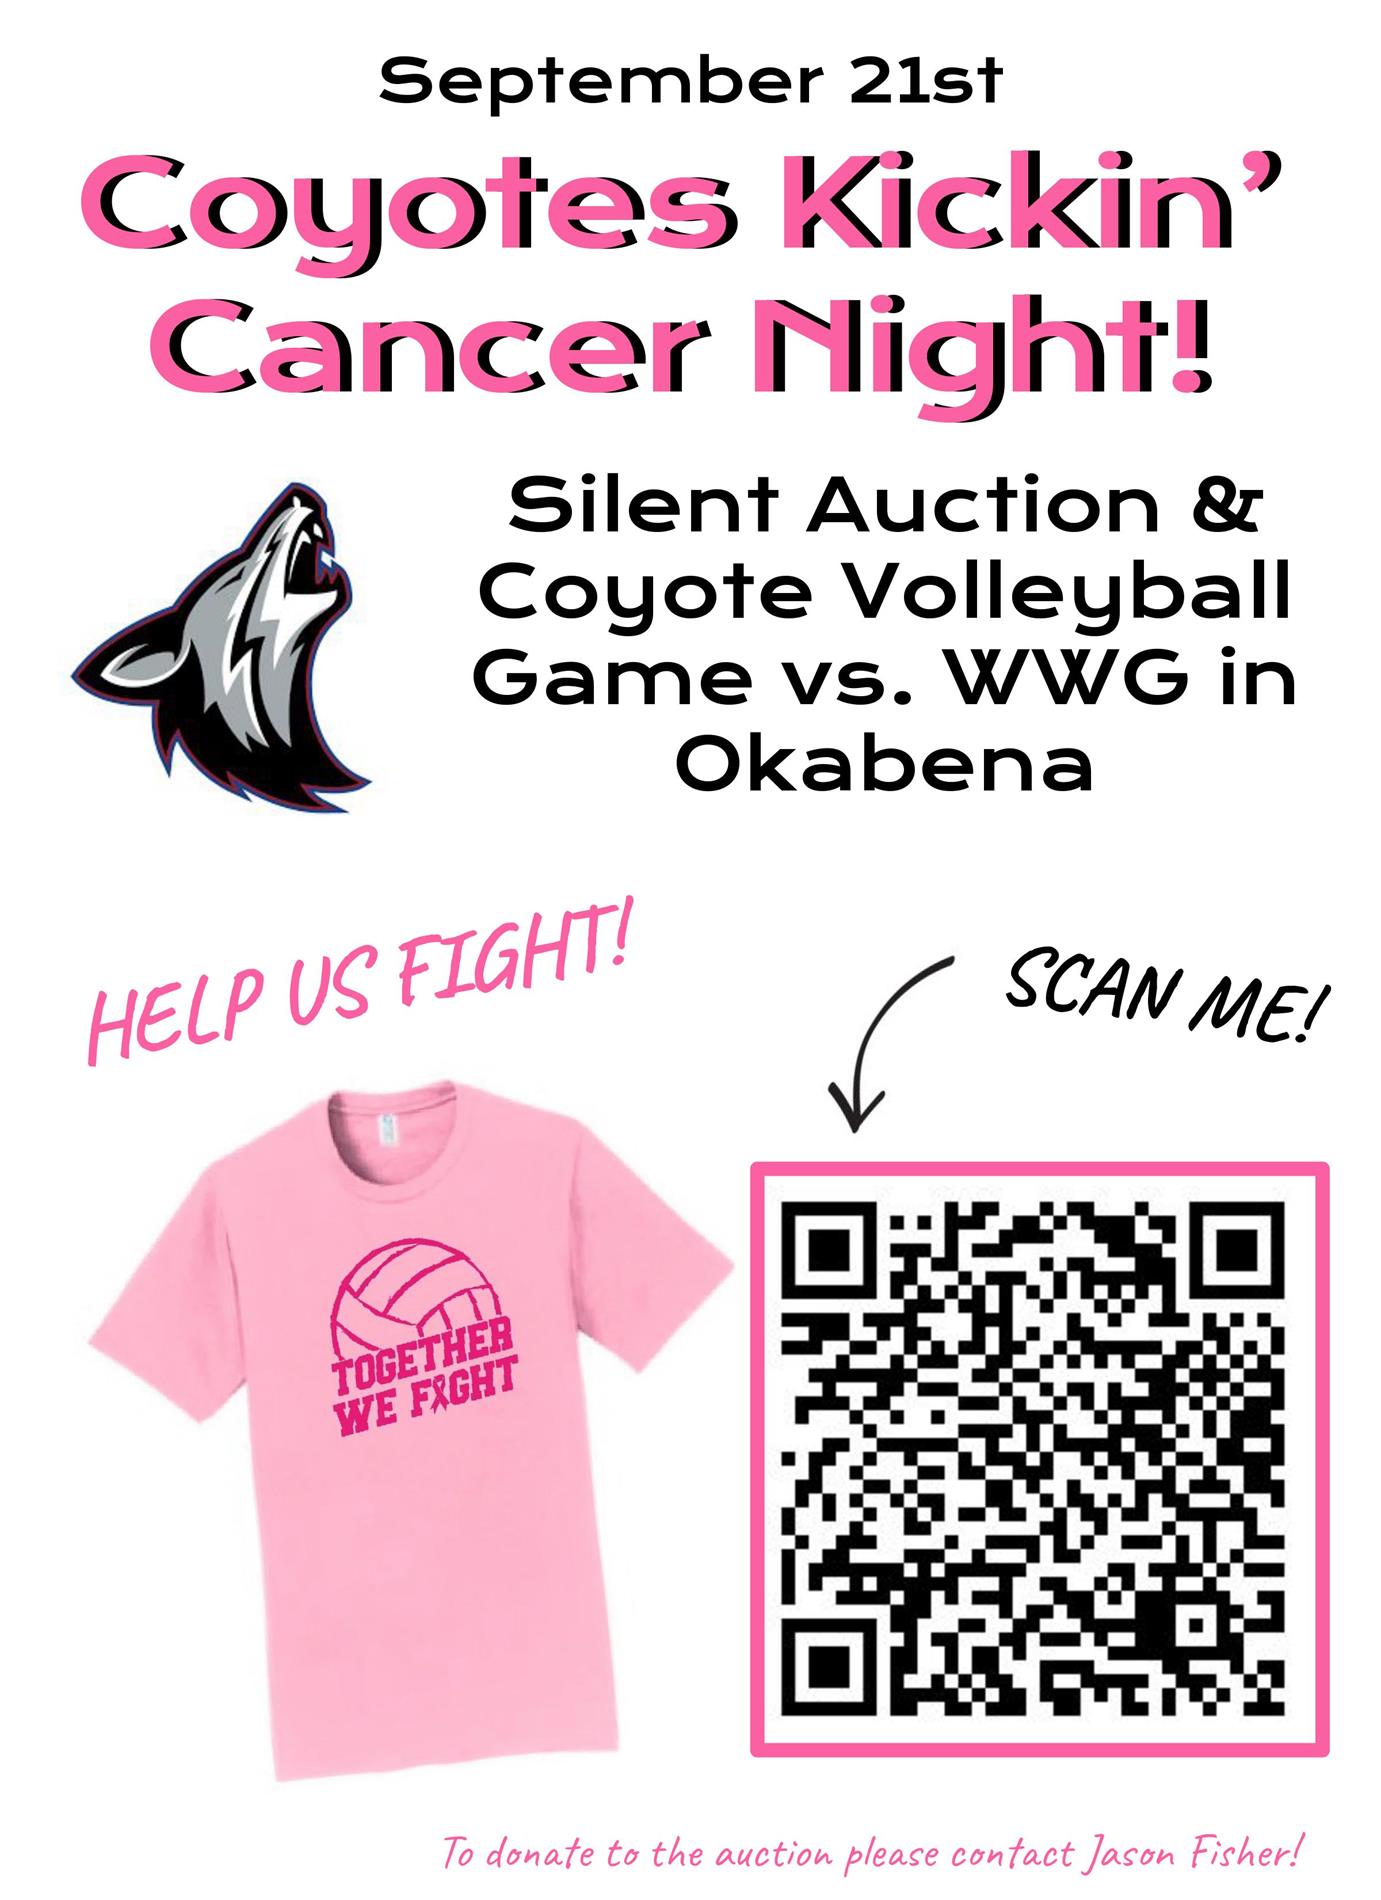 Coyotes Kickin' Cancer Night - Sept. 21st